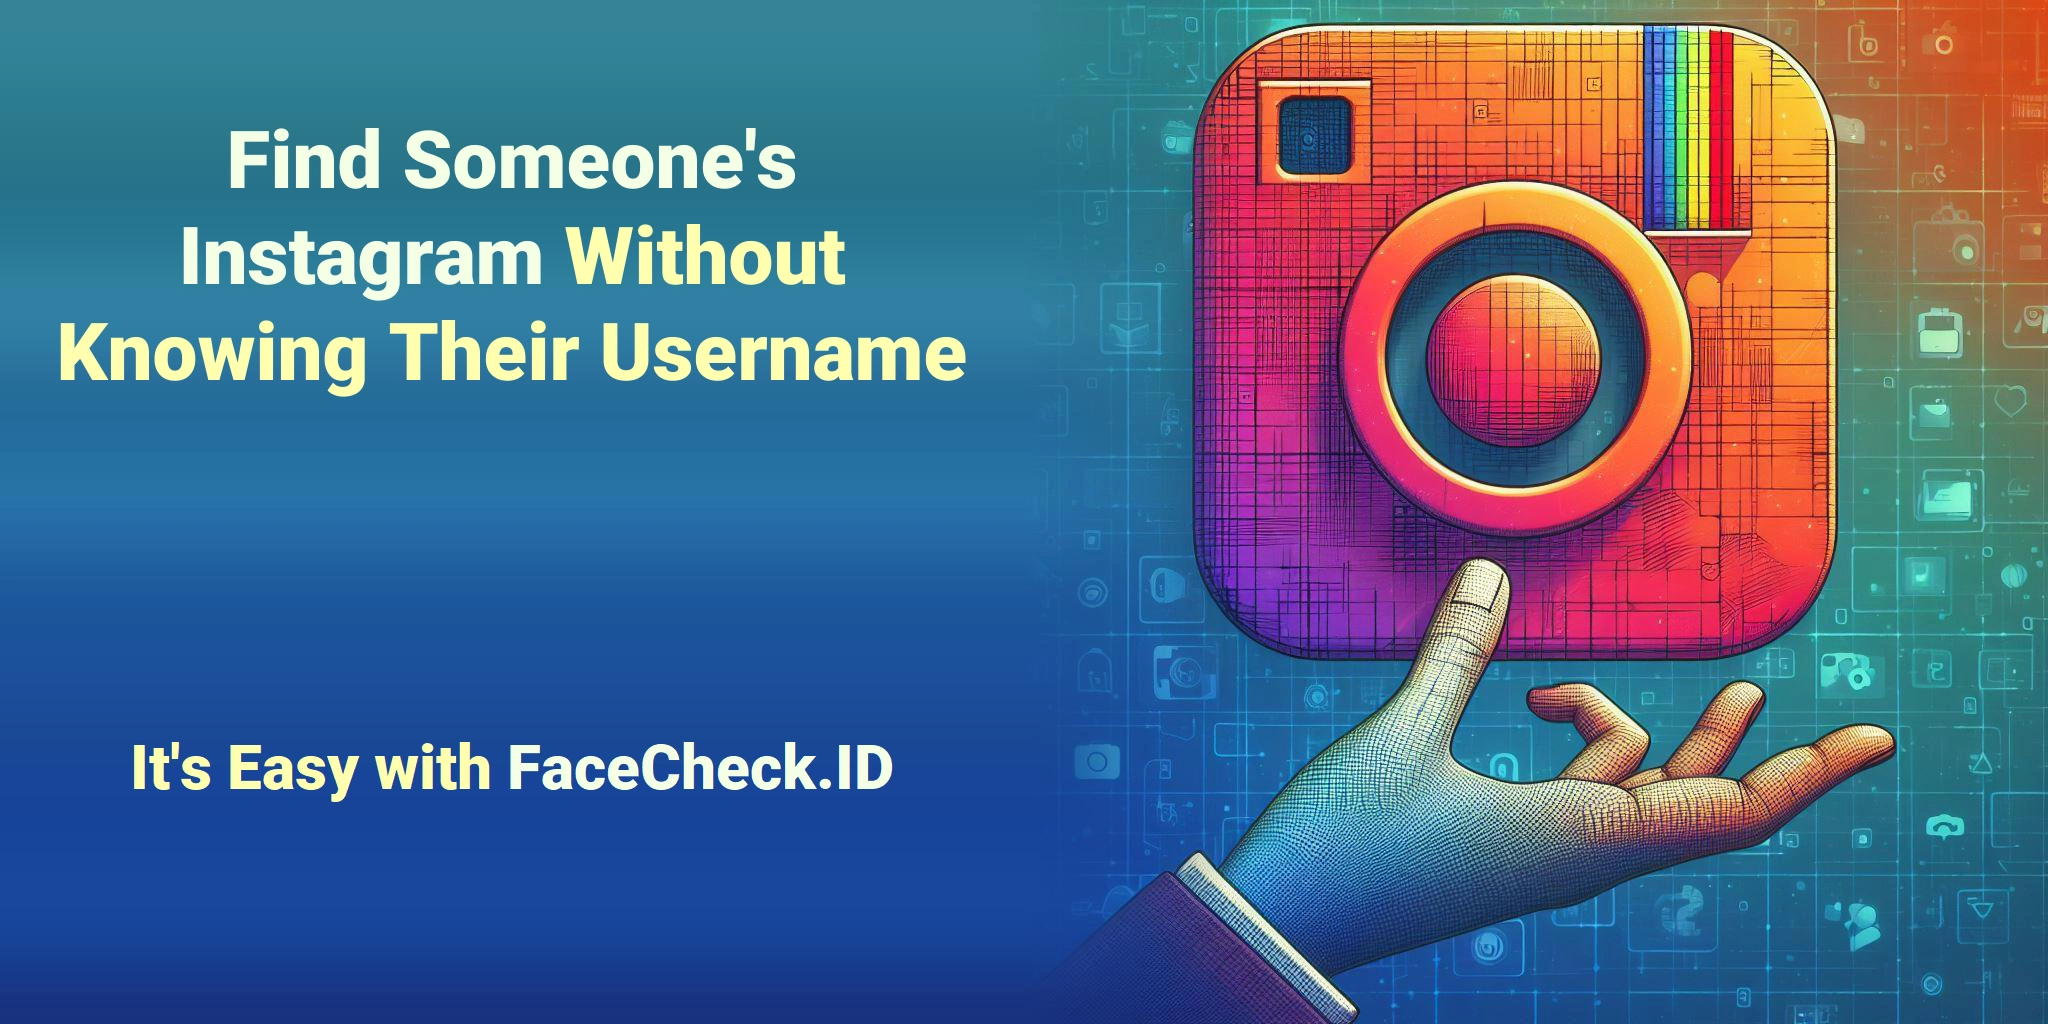 Find Someone's Instagram Without Knowing Their Username It's Easy with FaceCheck.ID